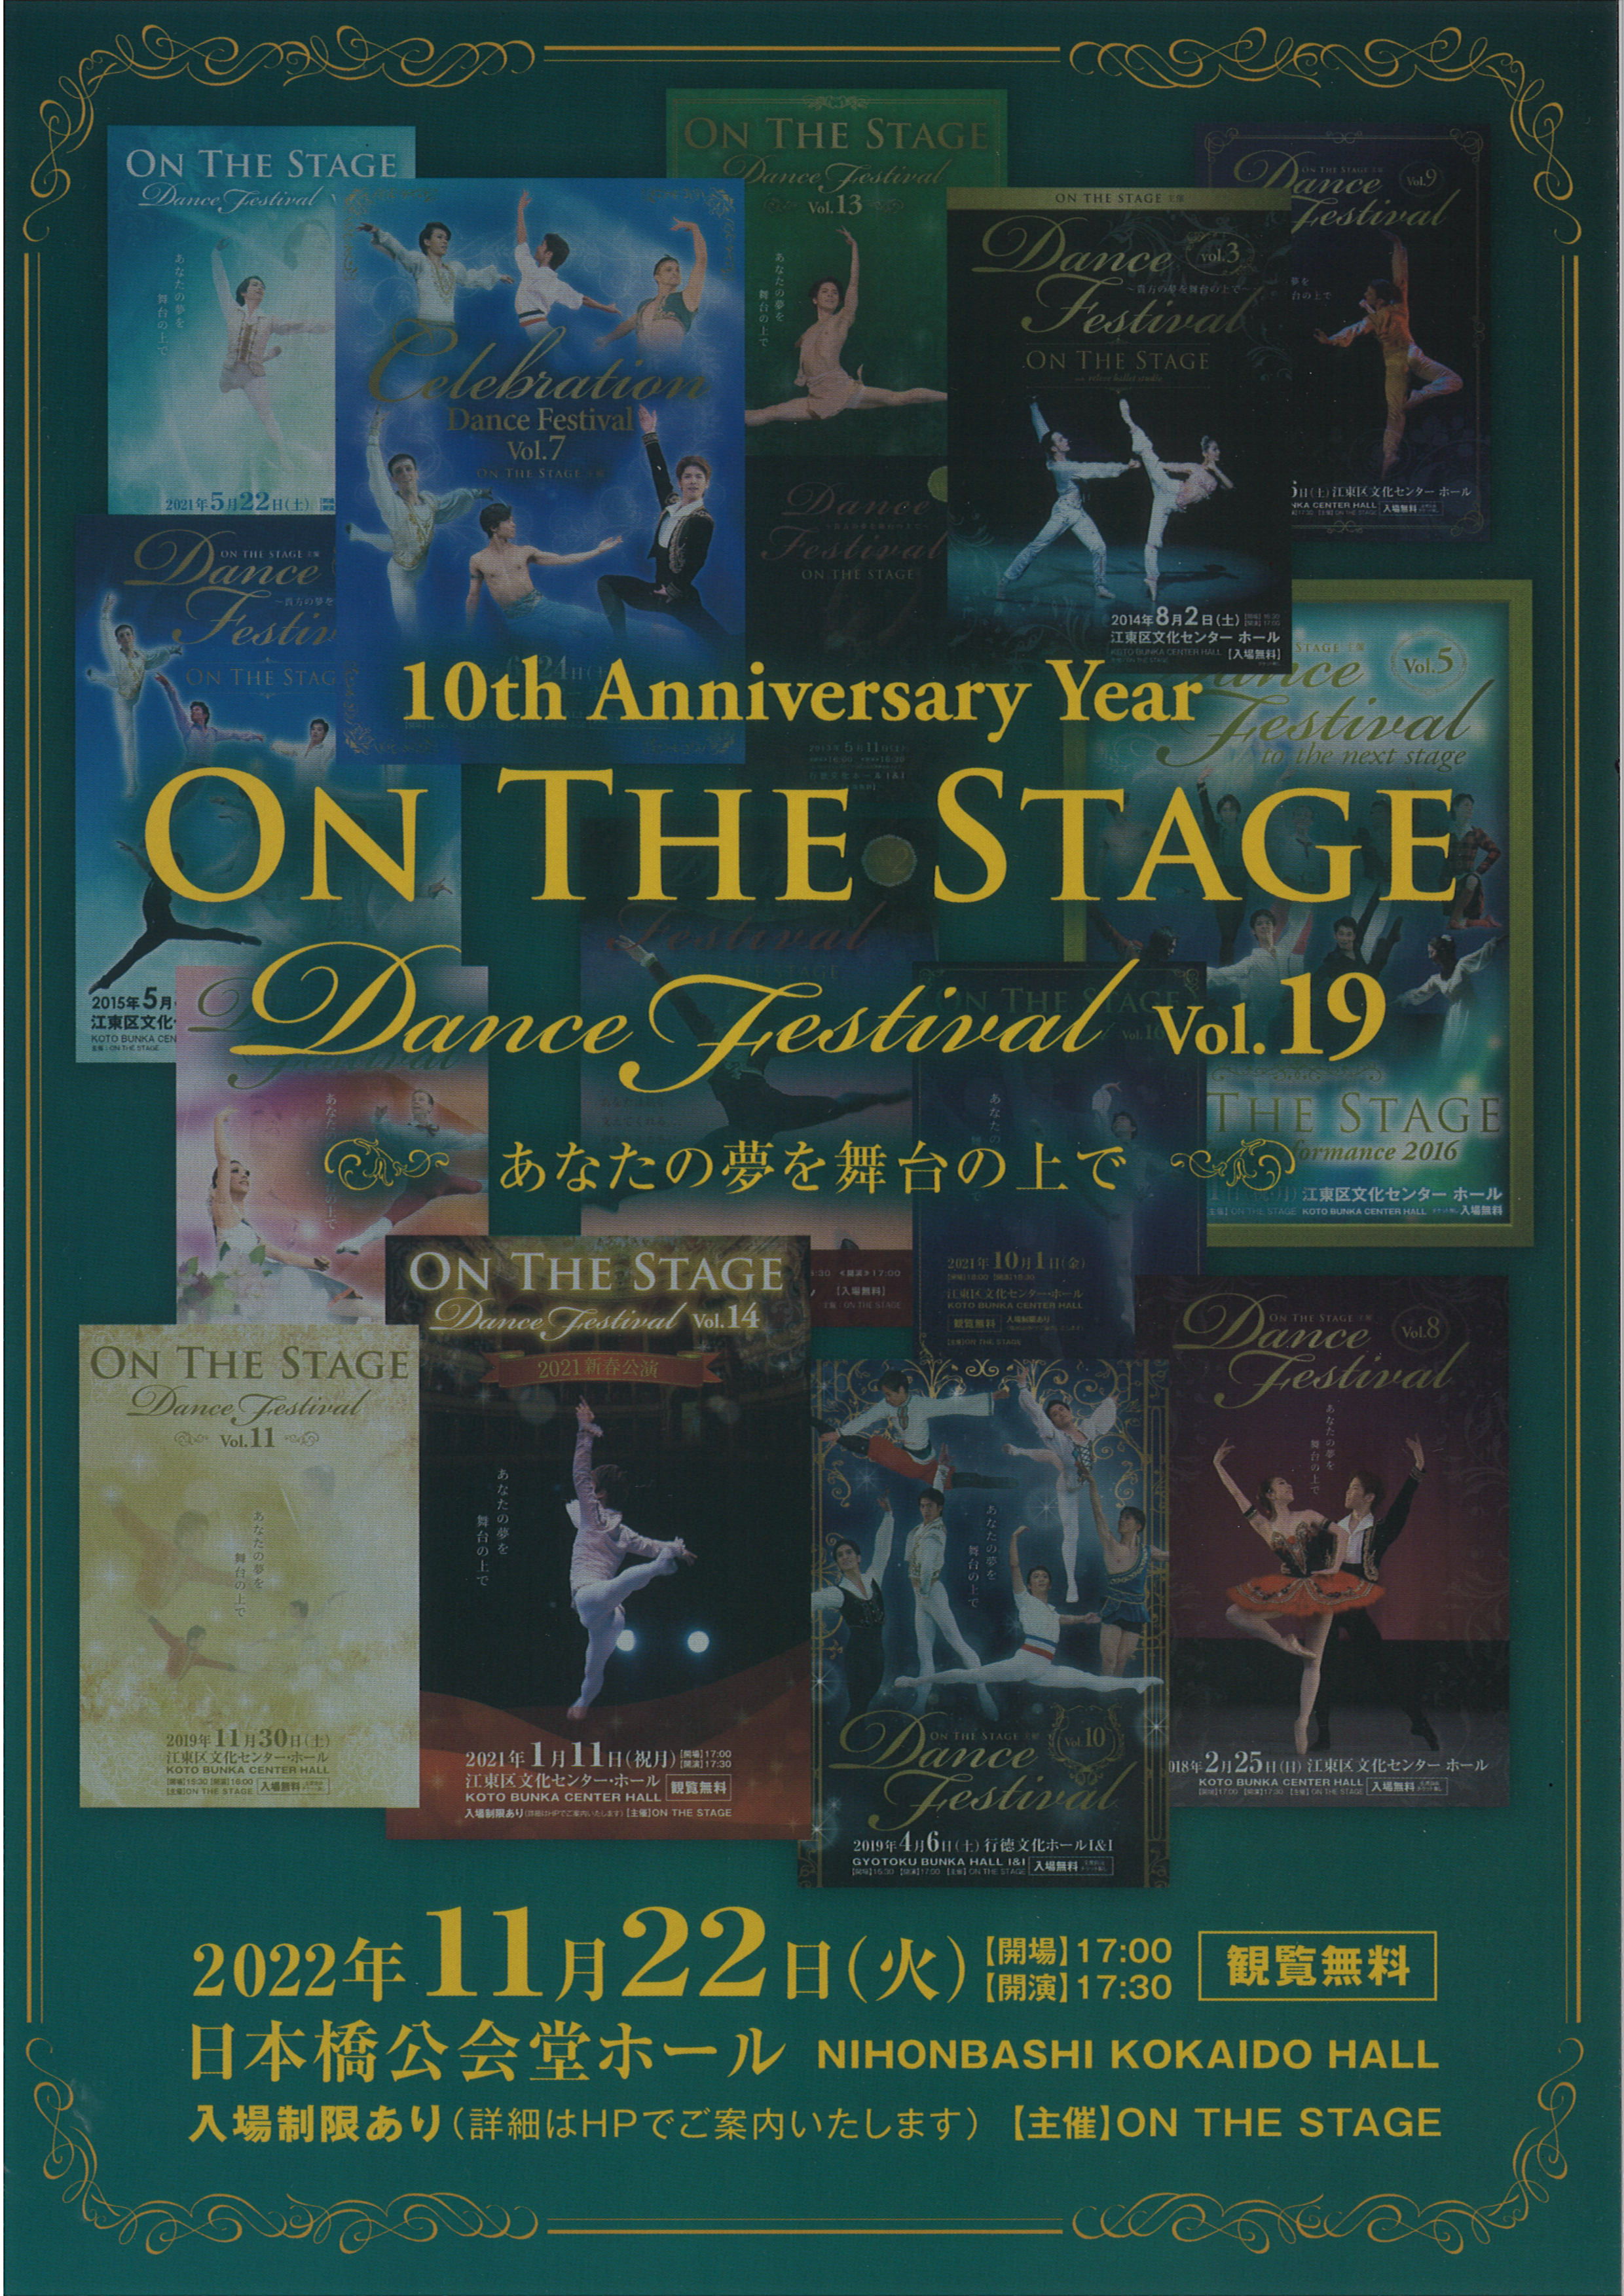 ON THE STAGE Dance Festival Vol.19